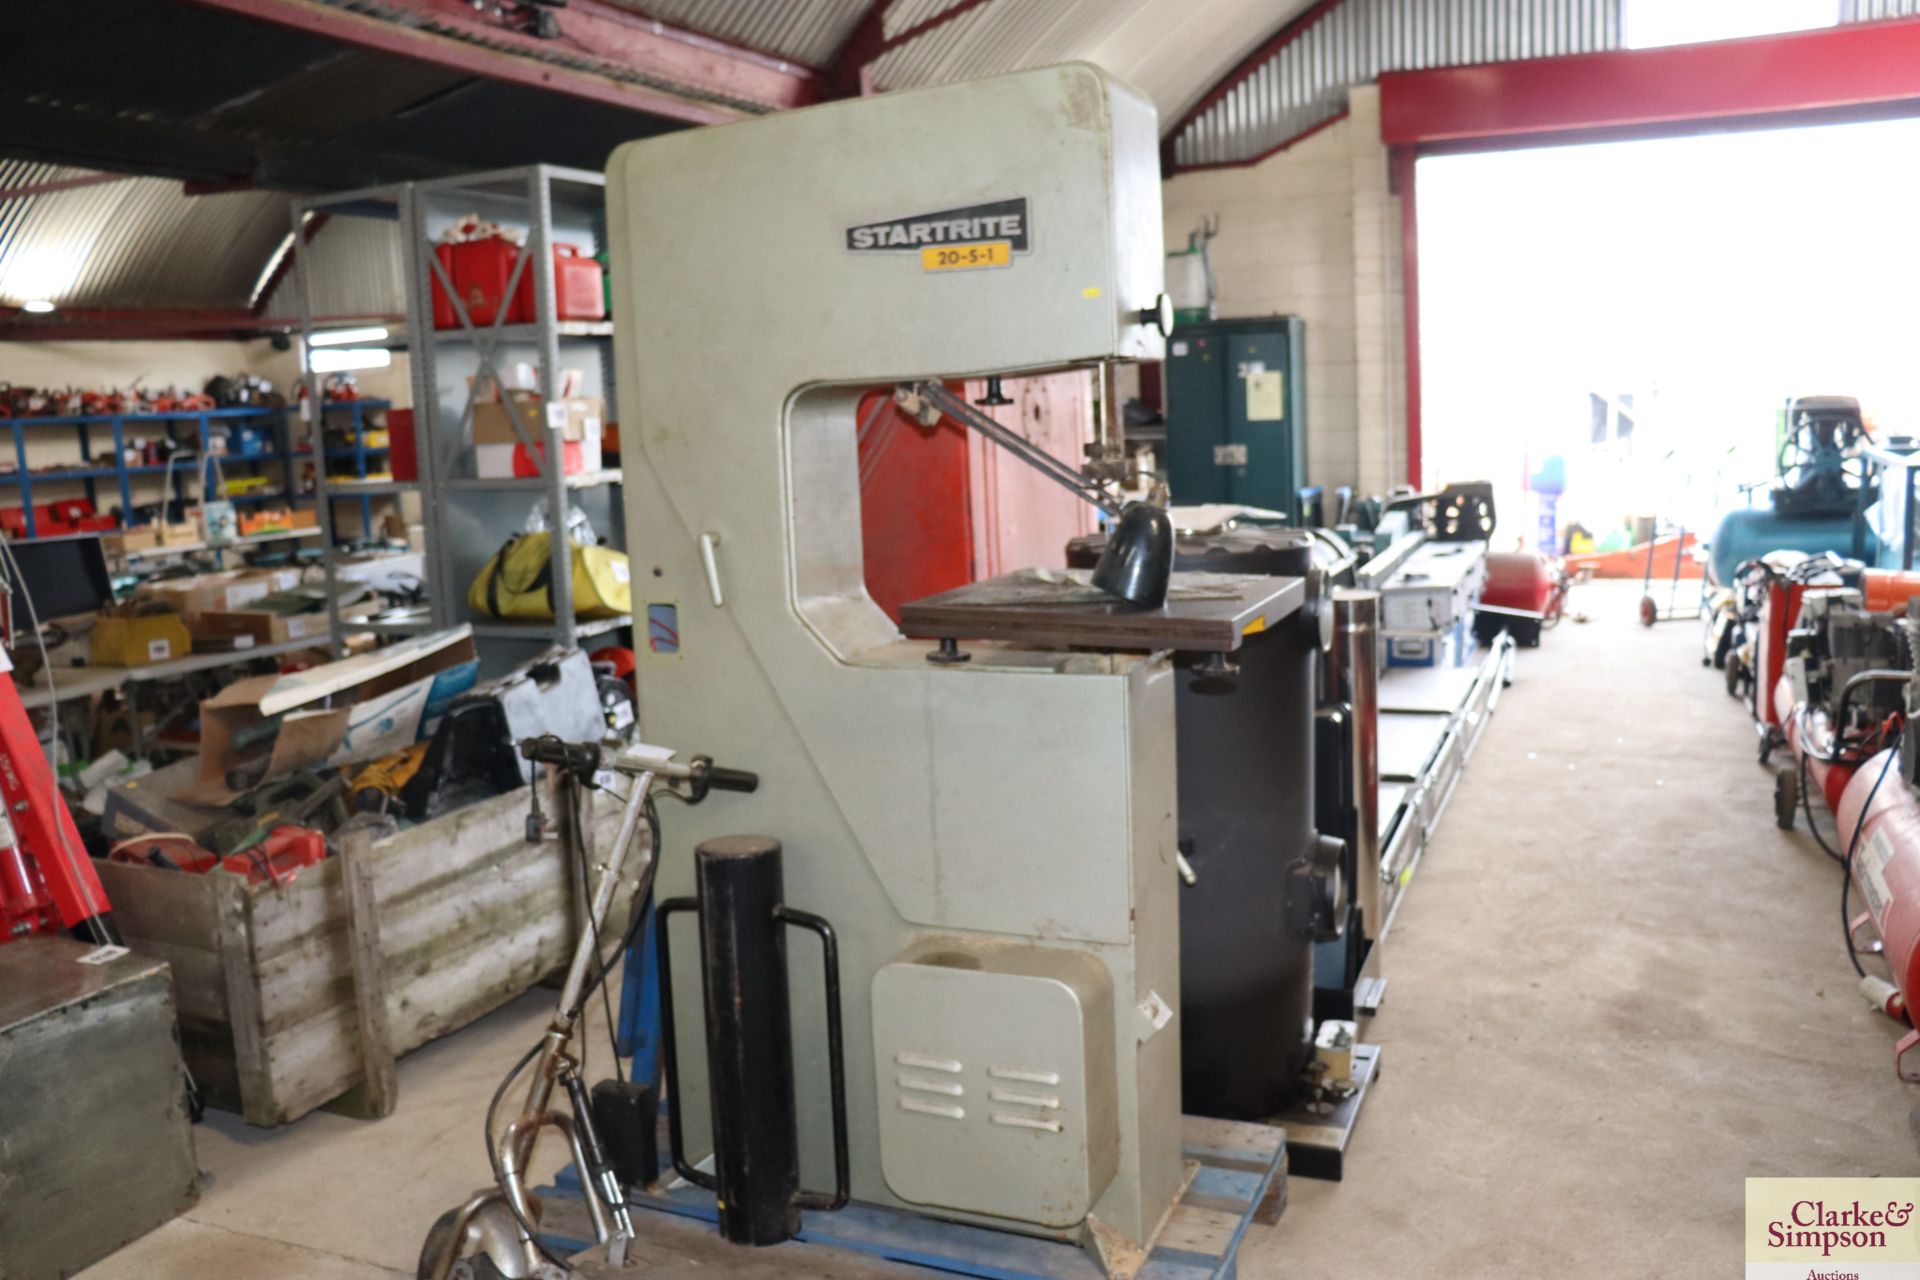 Startrite 20-S-1 large band saw.